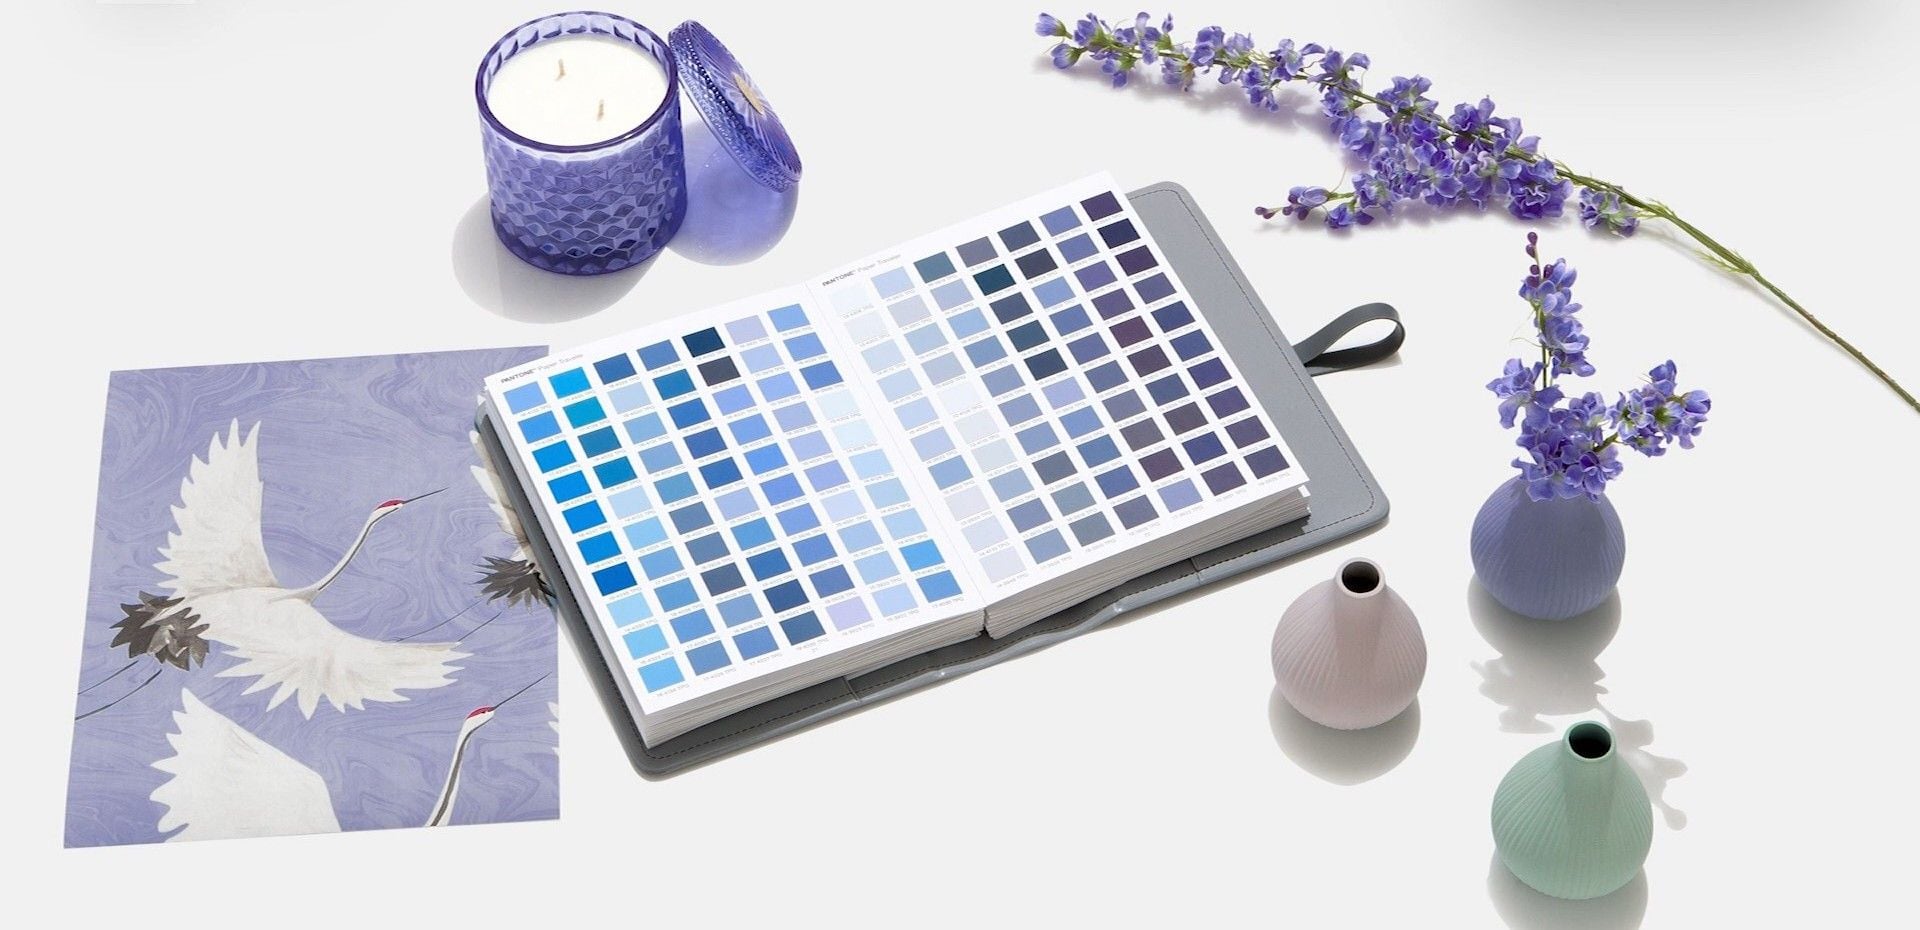 Pots, paintings, and a color swatch book open to Pantone blues and purples all give one a better idea of 